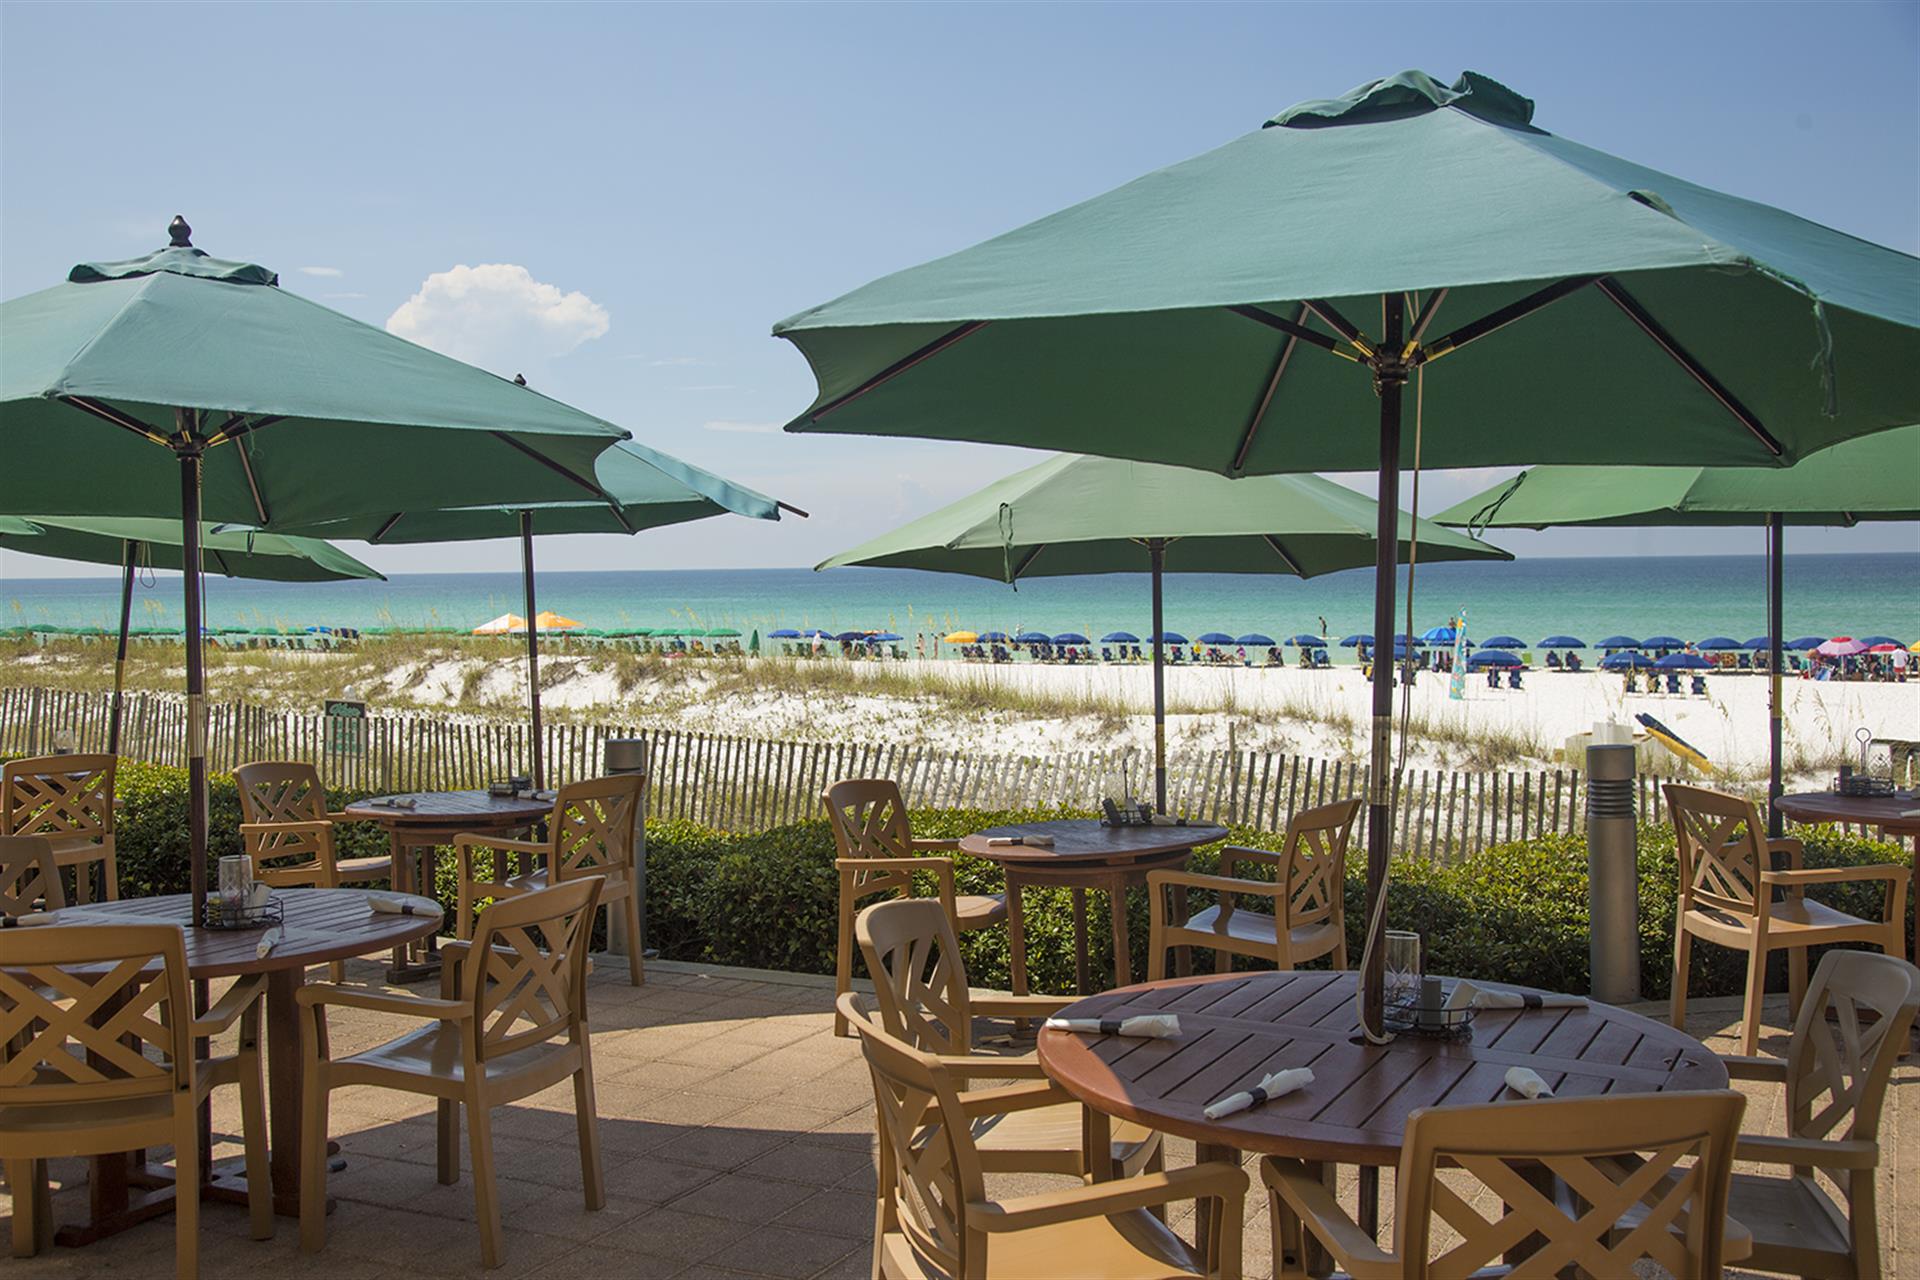 Fabulous outdoor seating alongside the Gulf of Mexico